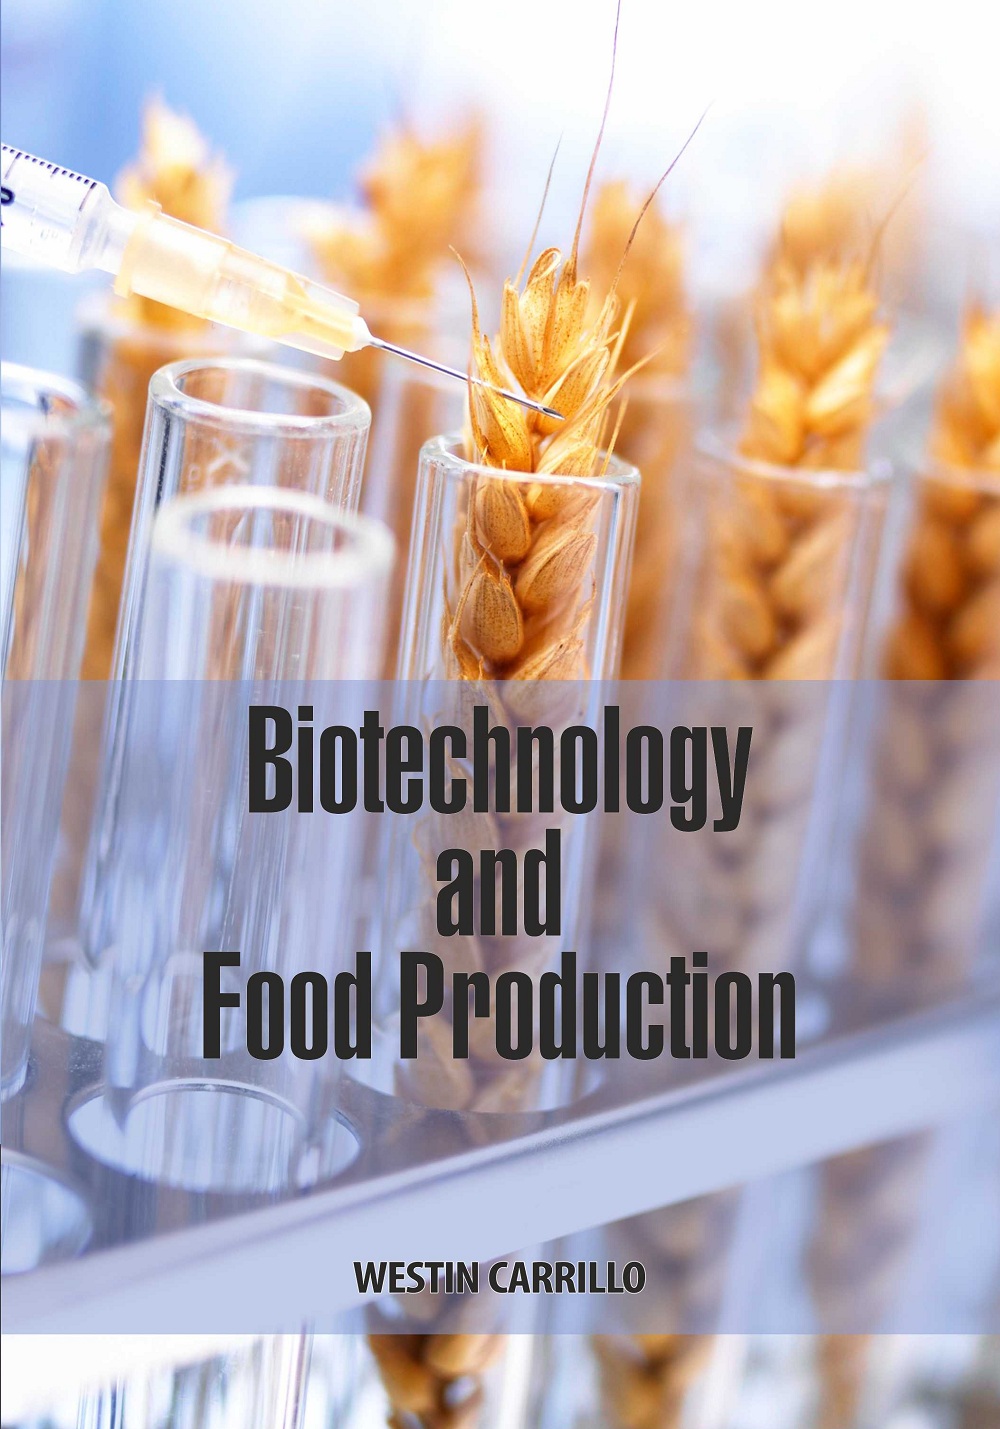 Biotechnology and Food Production